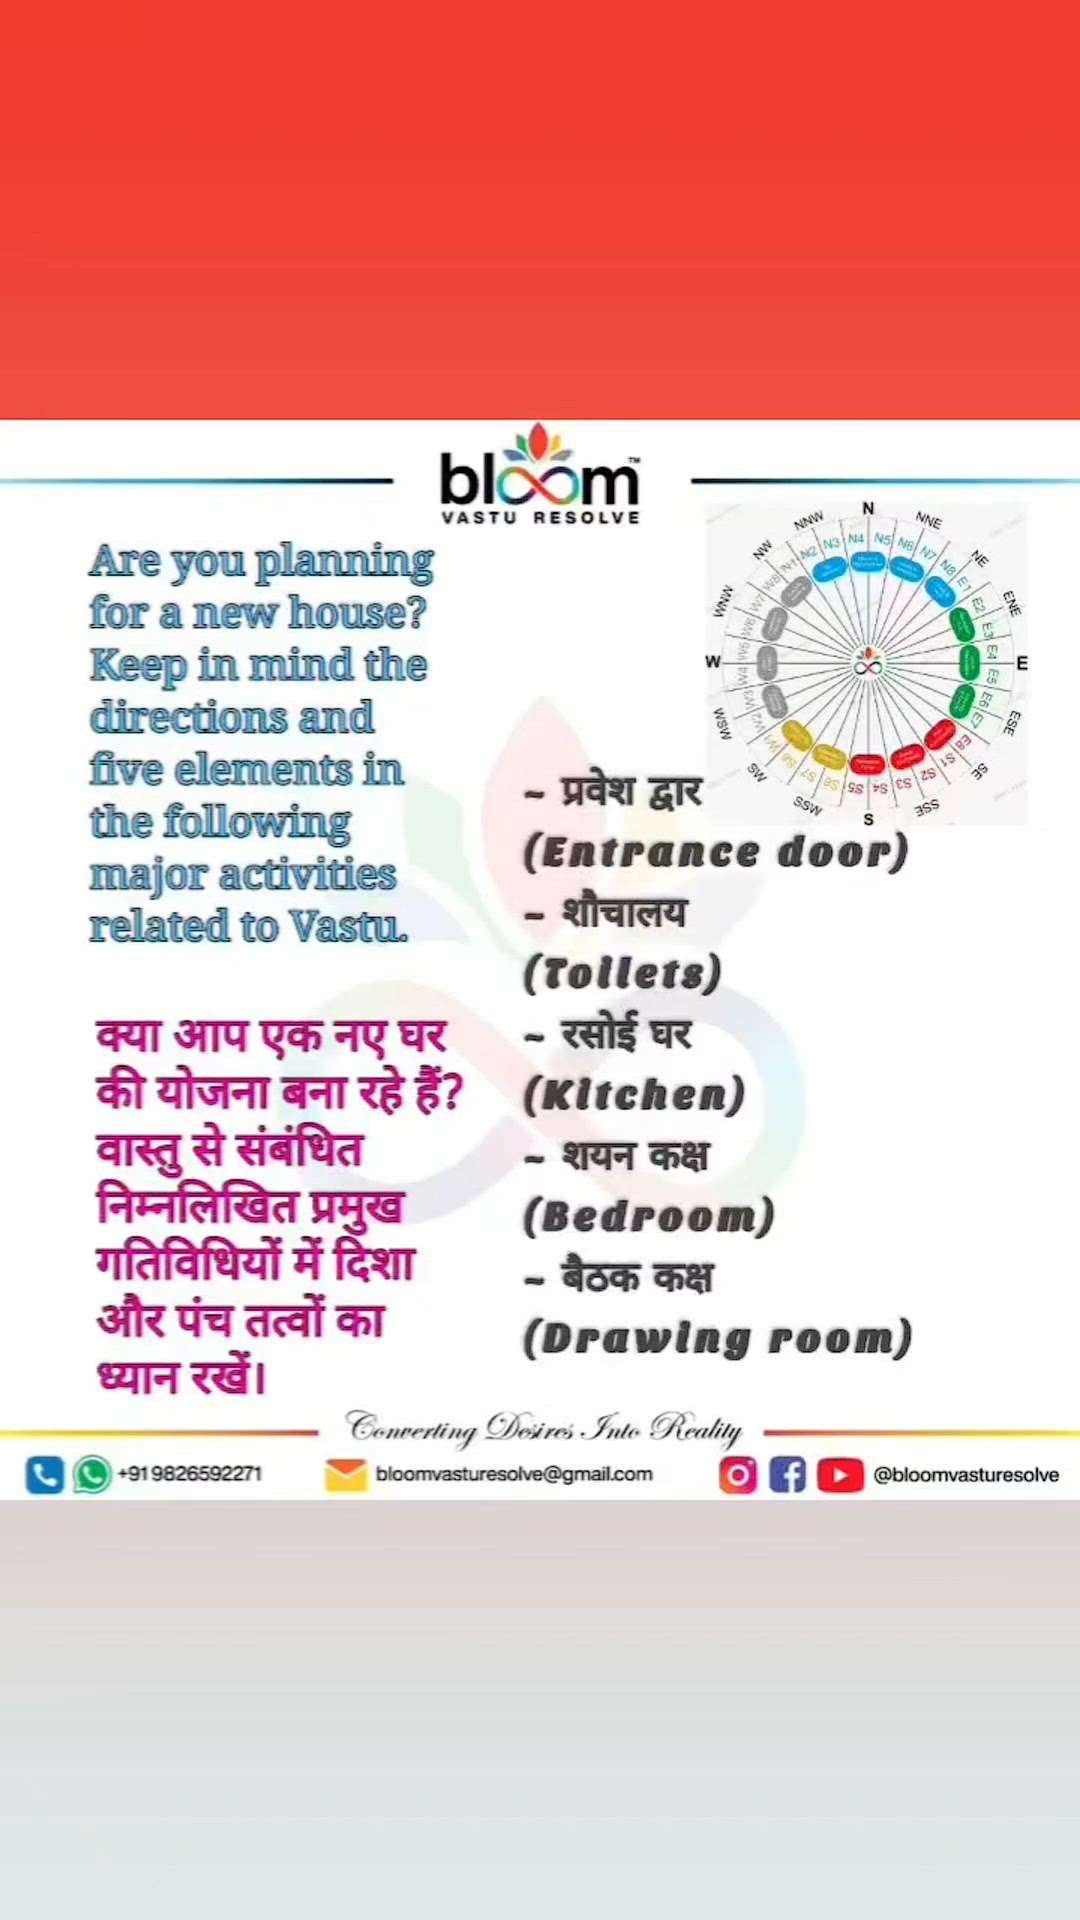 Your queries and comments are always welcome.
For more Vastu please follow @bloomvasturesolve
on YouTube, Instagram & Facebook
.
.
For personal consultation, feel free to contact certified MahaVastu Expert through
M - 9826592271
Or
bloomvasturesolve@gmail.com
#vastu #वास्तु #mahavastu #mahavastuexpert #bloomvasturesolve  #vastureels #vastulogy #vastuexpert  #vasturemedies  #vastuforhome #vastuforpeace #vastudosh #numerology #vastuforhome #panchtatva #पंचतत्व #houseplanning